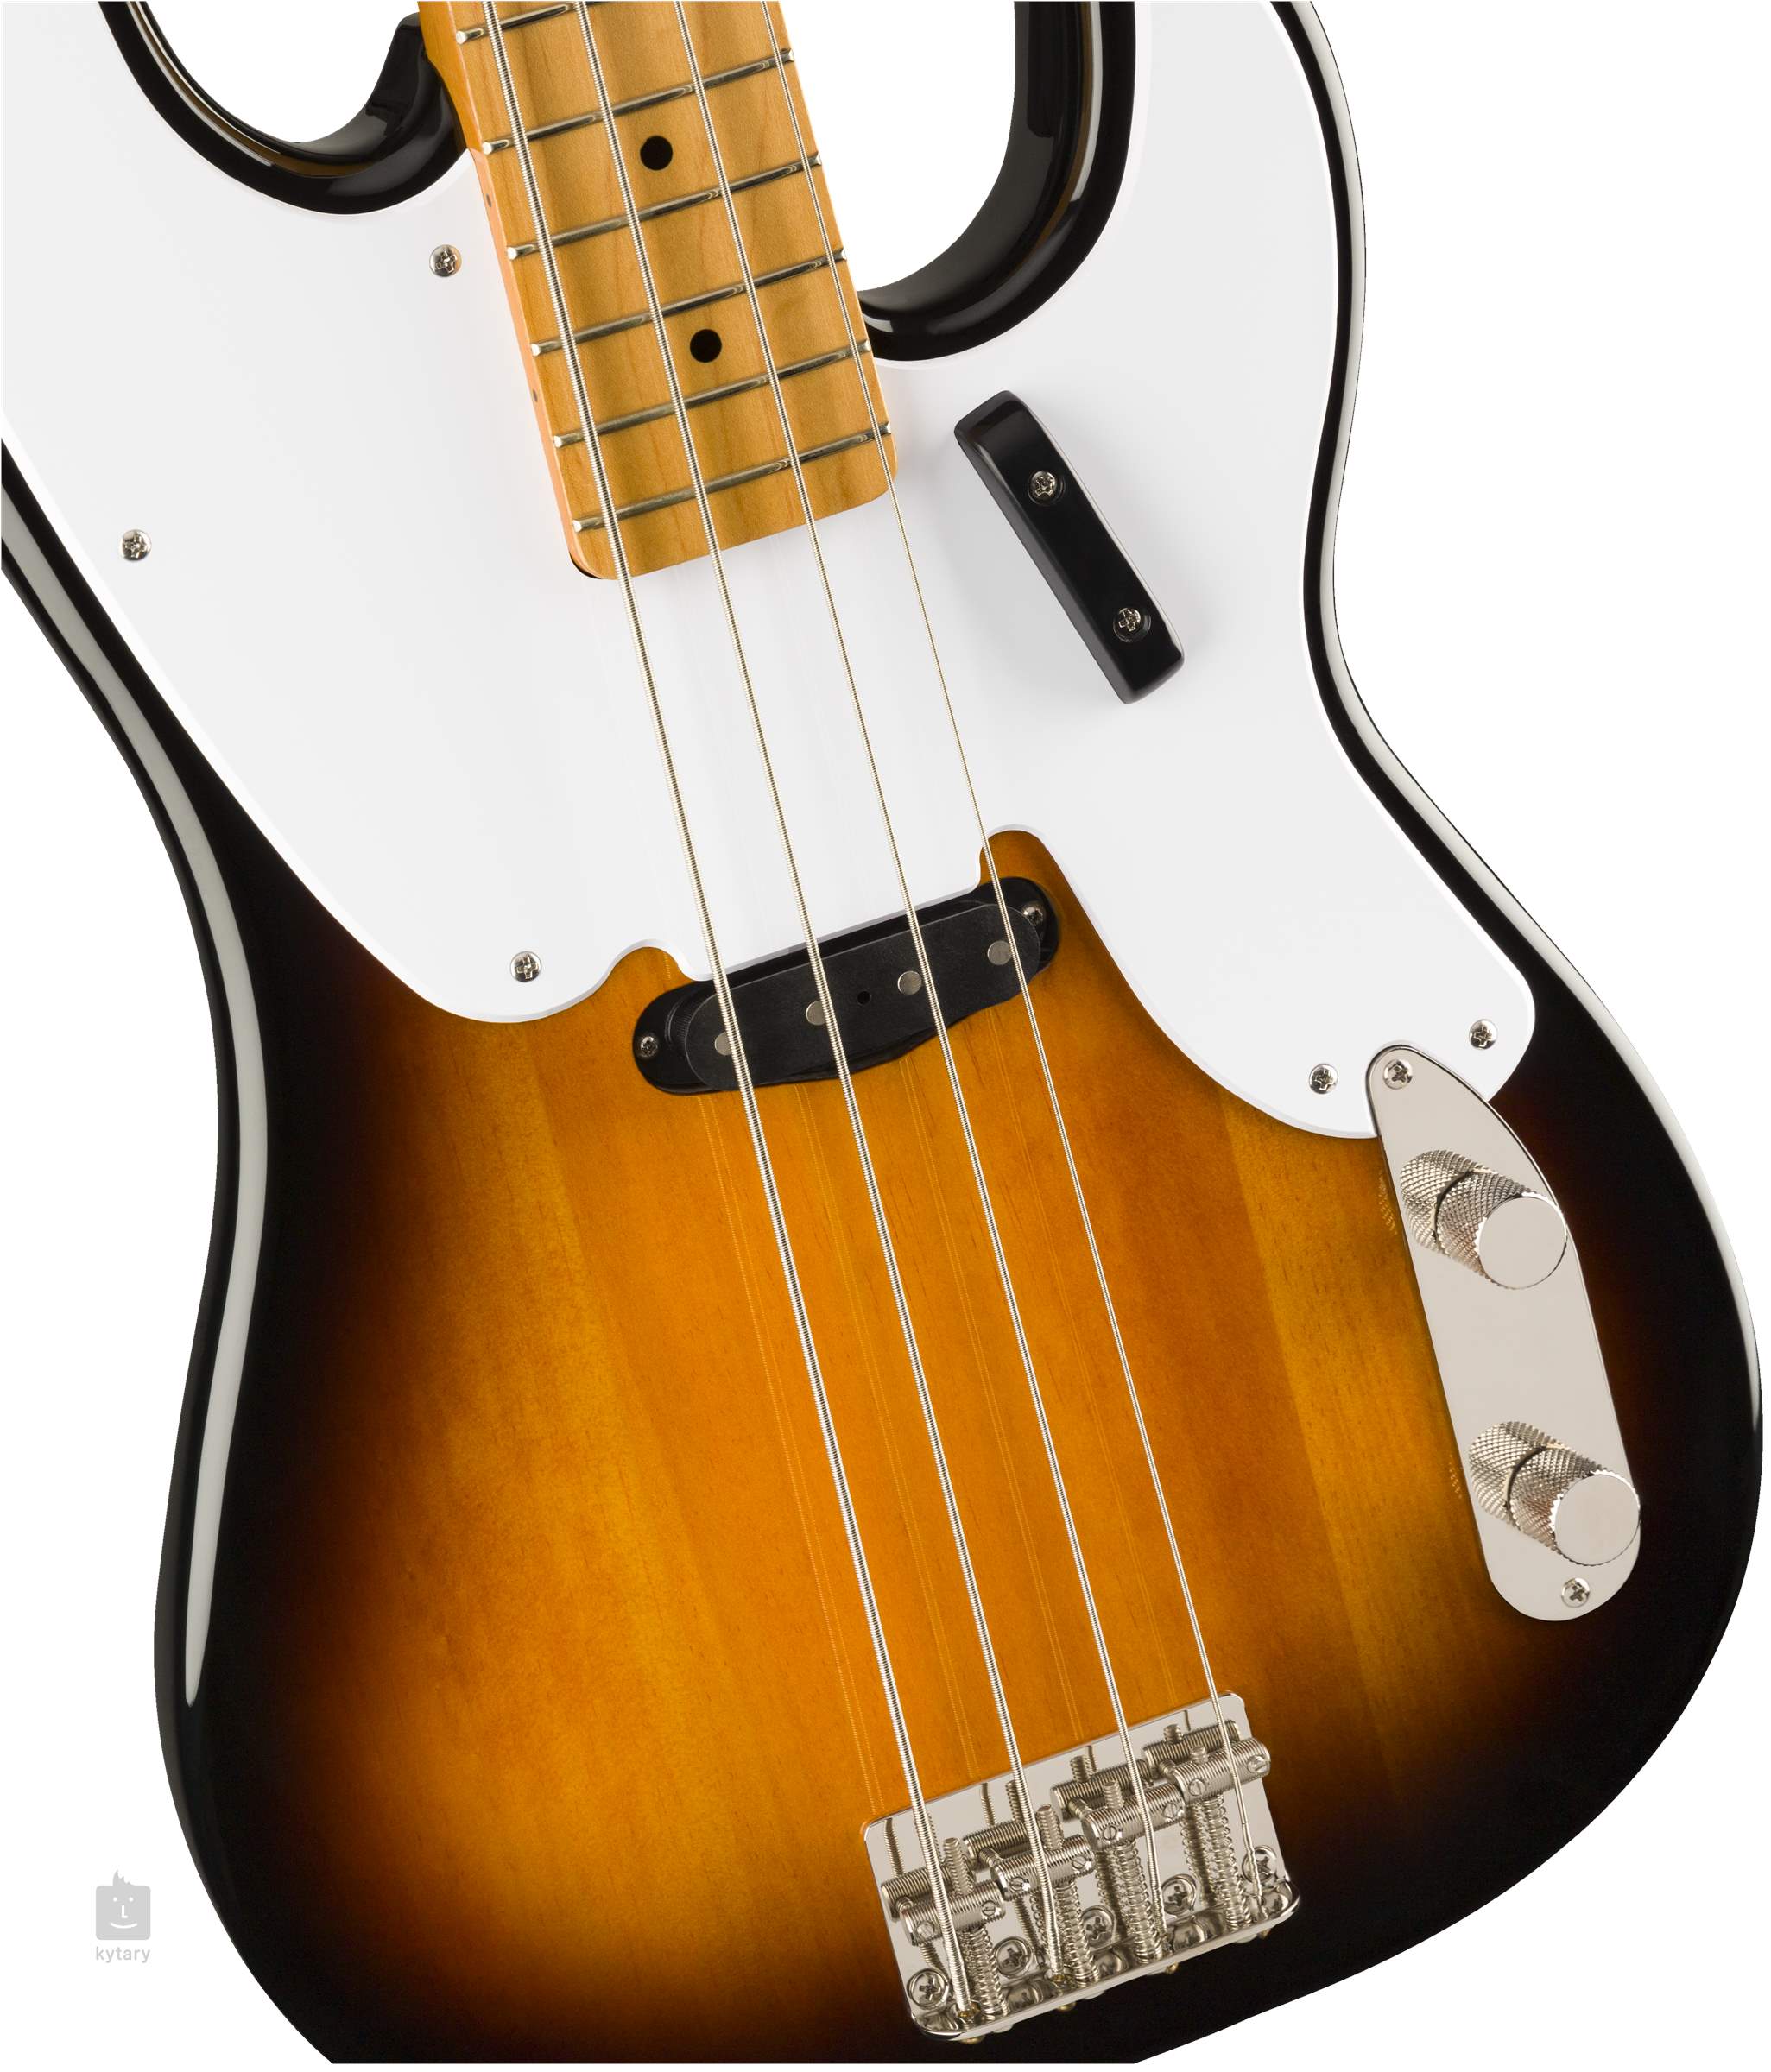 Bass 50. Squier Classic Vibe 50s. Squier Precision Bass Classic Vibe. Бас-гитара Squier Classic Vibe Precision Bass '50s. Бас-гитара "Precision Bass", цвет санбёрст, Foix.